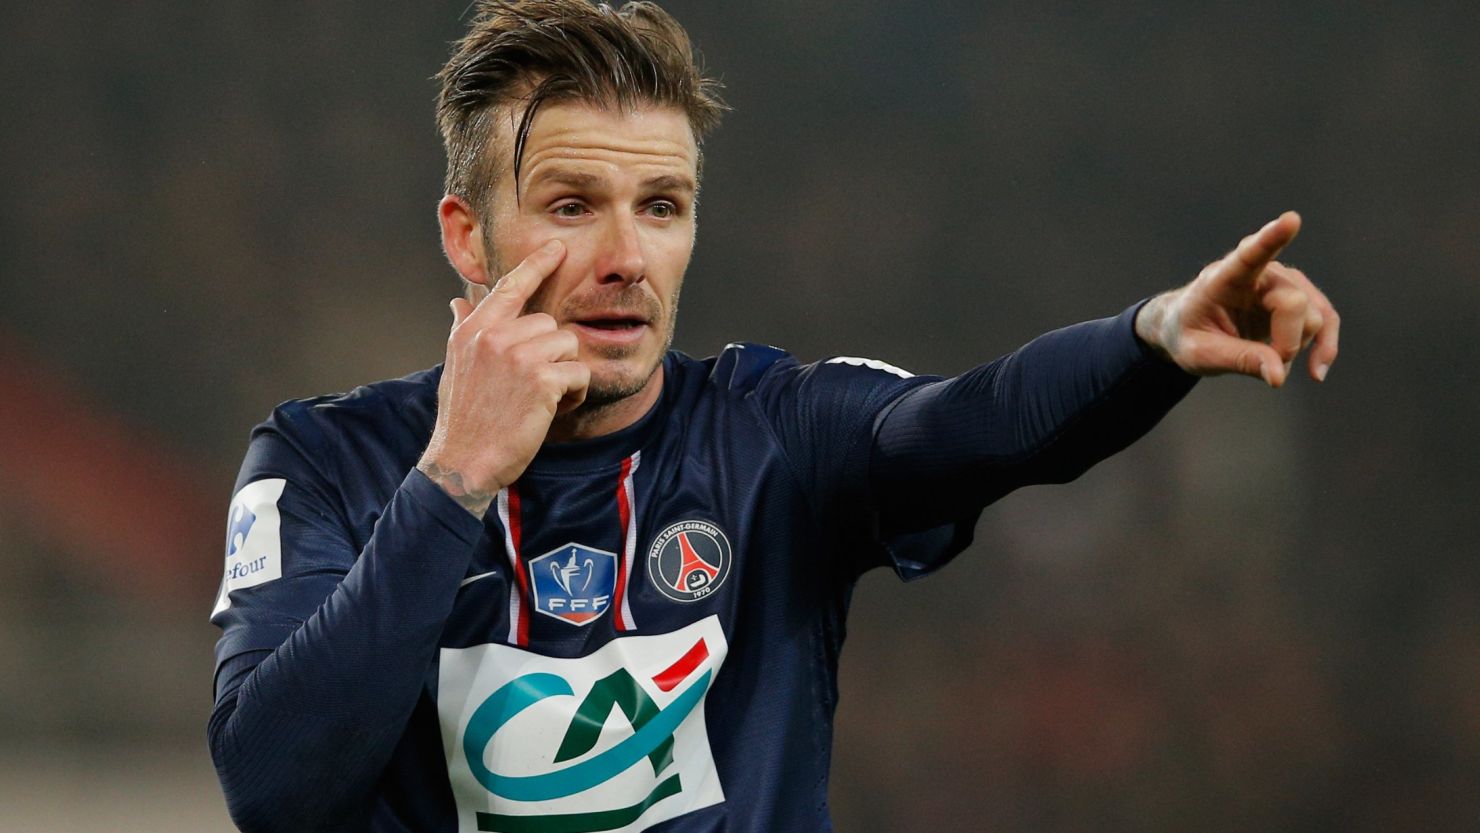 David Beckham made his full debut for Paris Saint-Germain in the French Cup contest against Marseille.